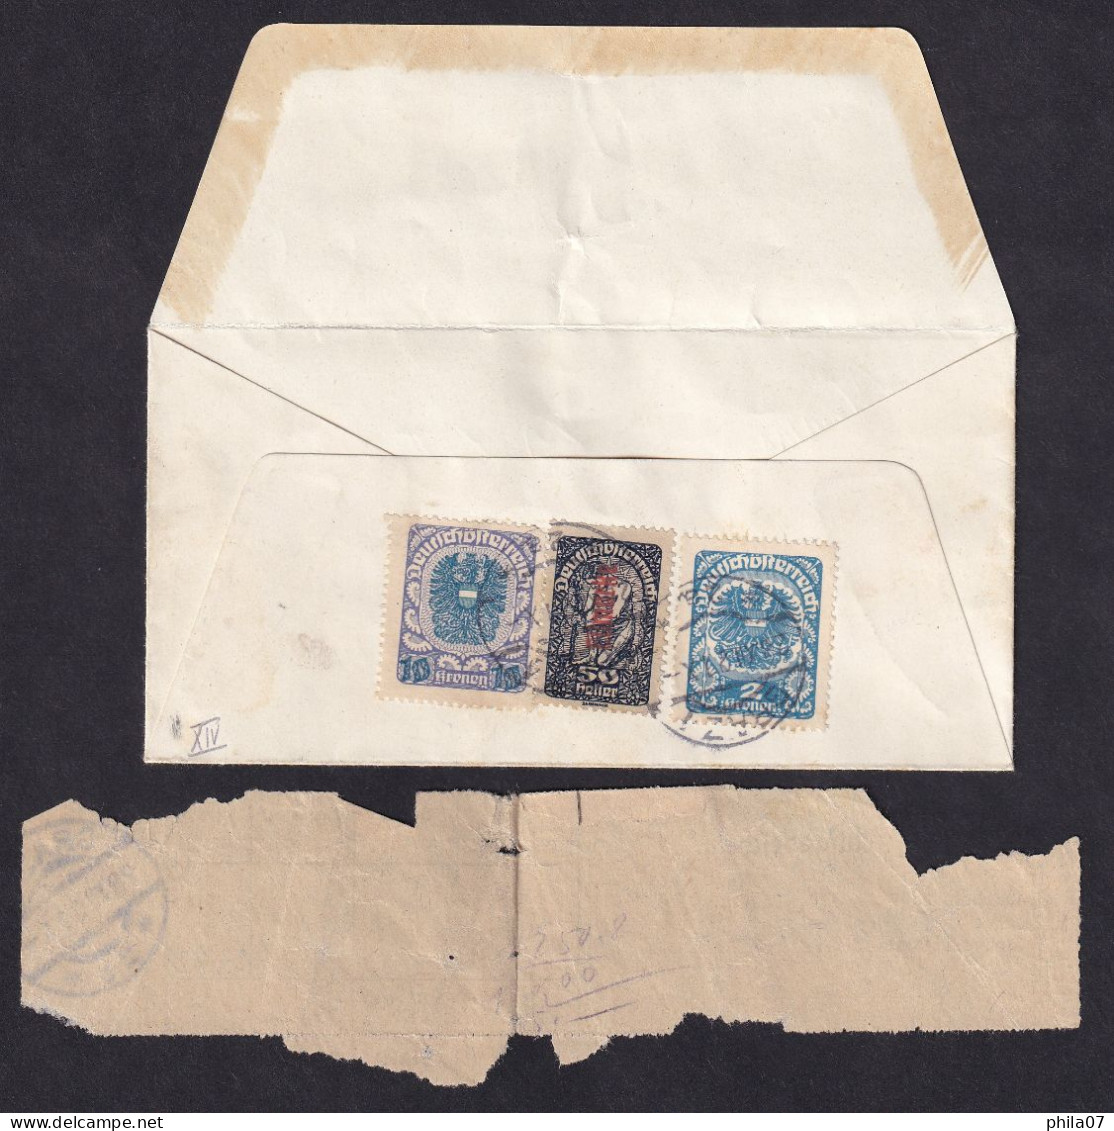 AUSTRIA - Letter Sent By Registered Mail Loco Graz 28.12.1921. Franking On The Back Of Letter With Three Stamps / 3 Scan - Brieven En Documenten